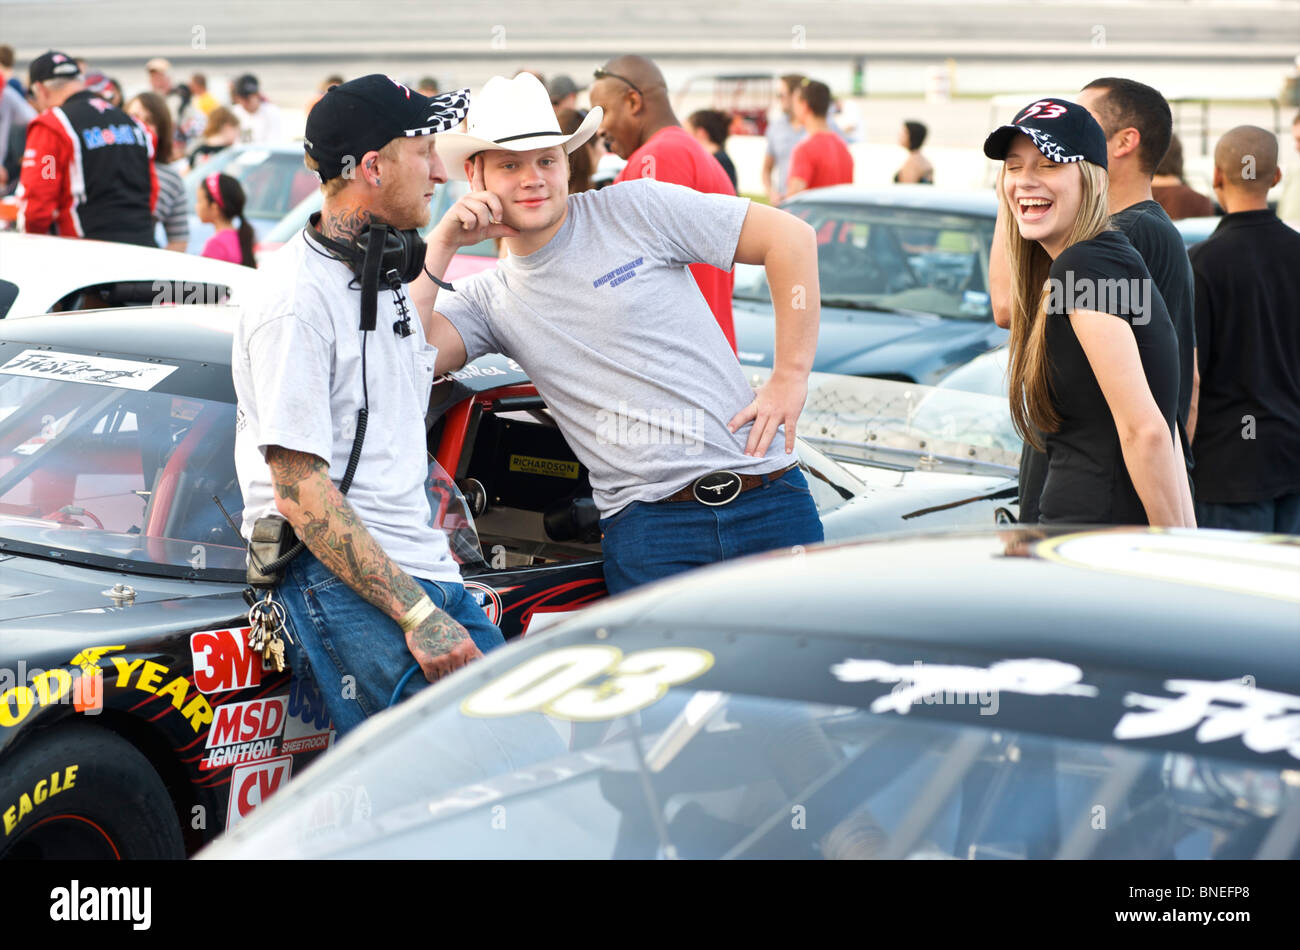 Friends in discussion at Nascar car racing circuit Houston, Texas, USA Stock Photo